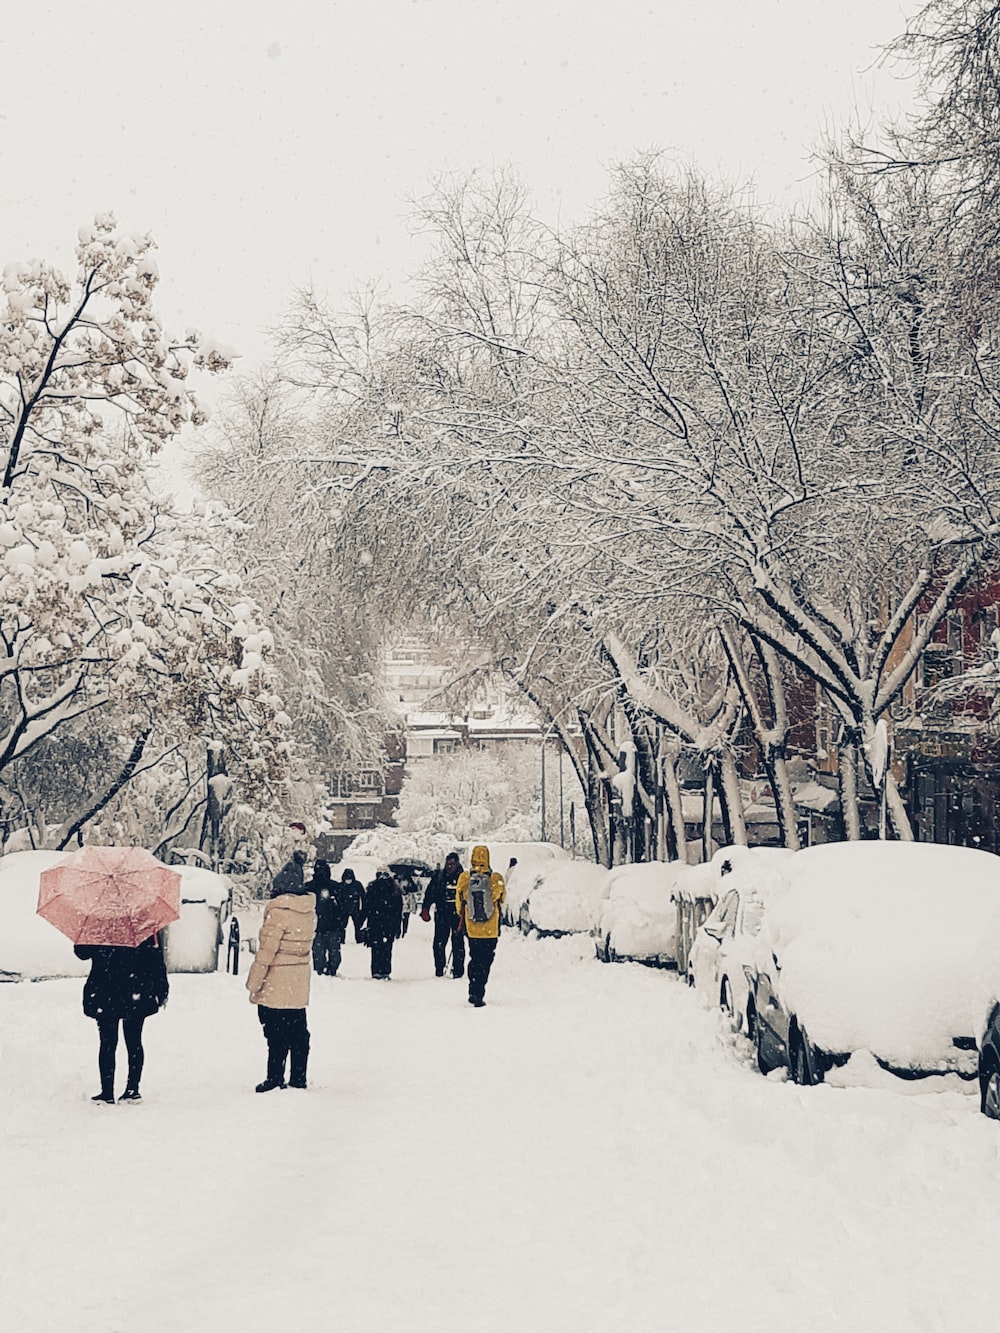 people walking on snow covered ground with bare trees during daytime